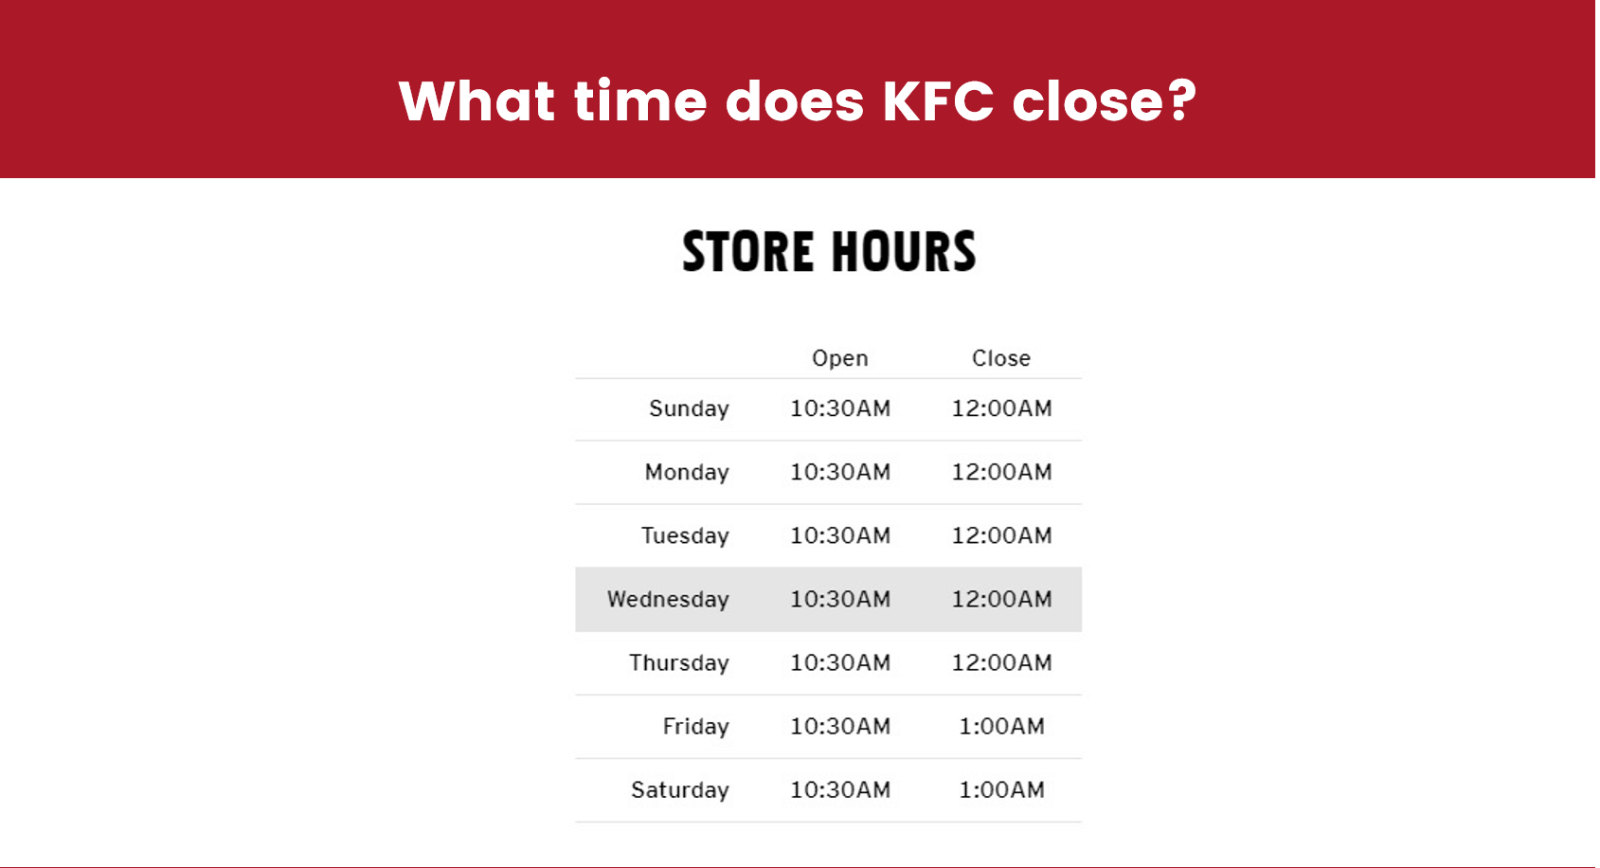 What time does KFC close